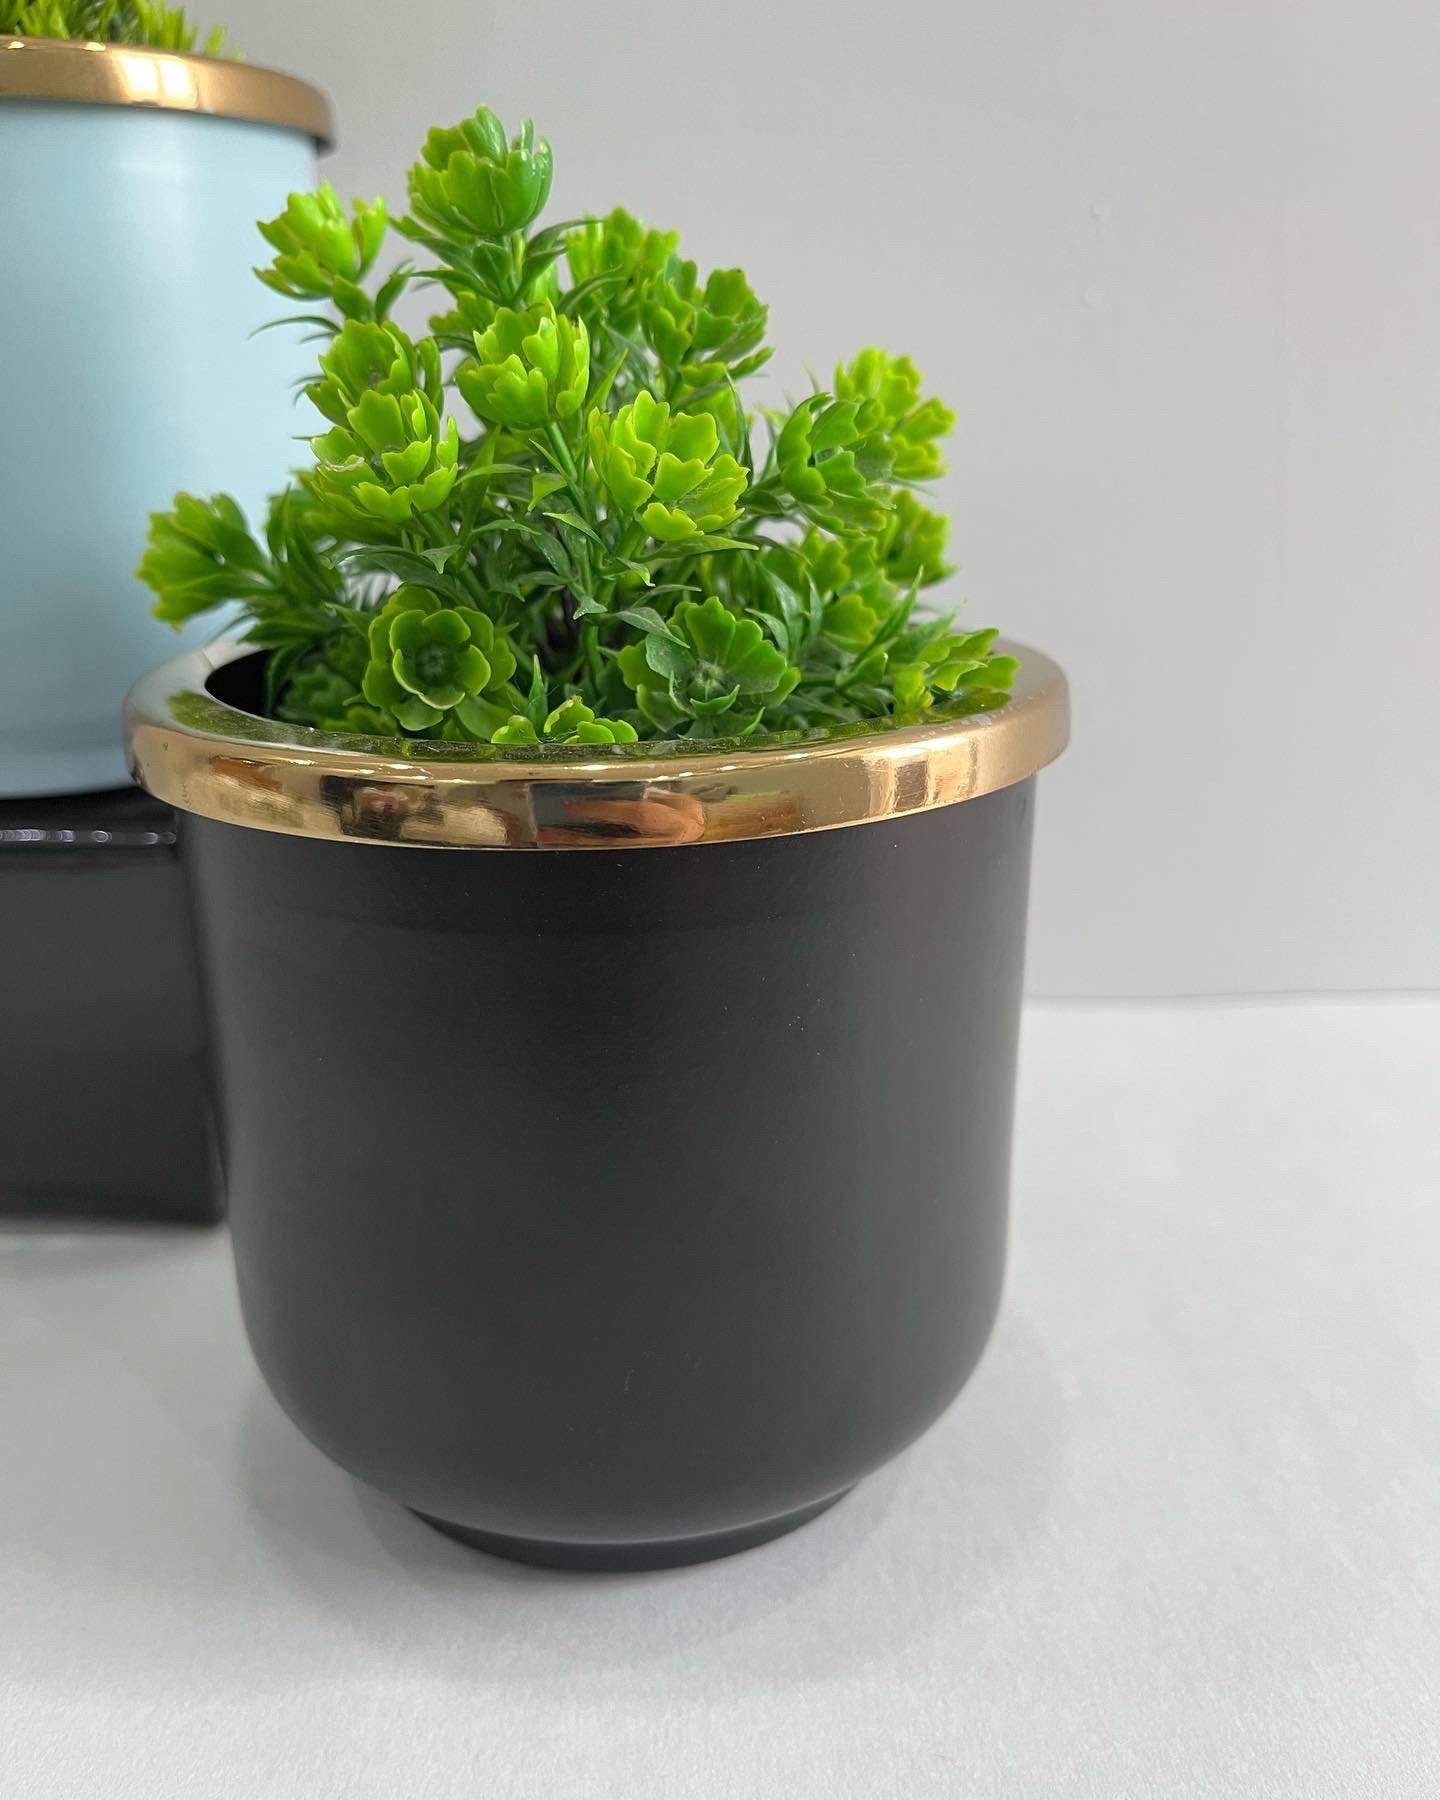 Set of 2 Planters 1 Large & 1 Small - Black & Light Blue with gold